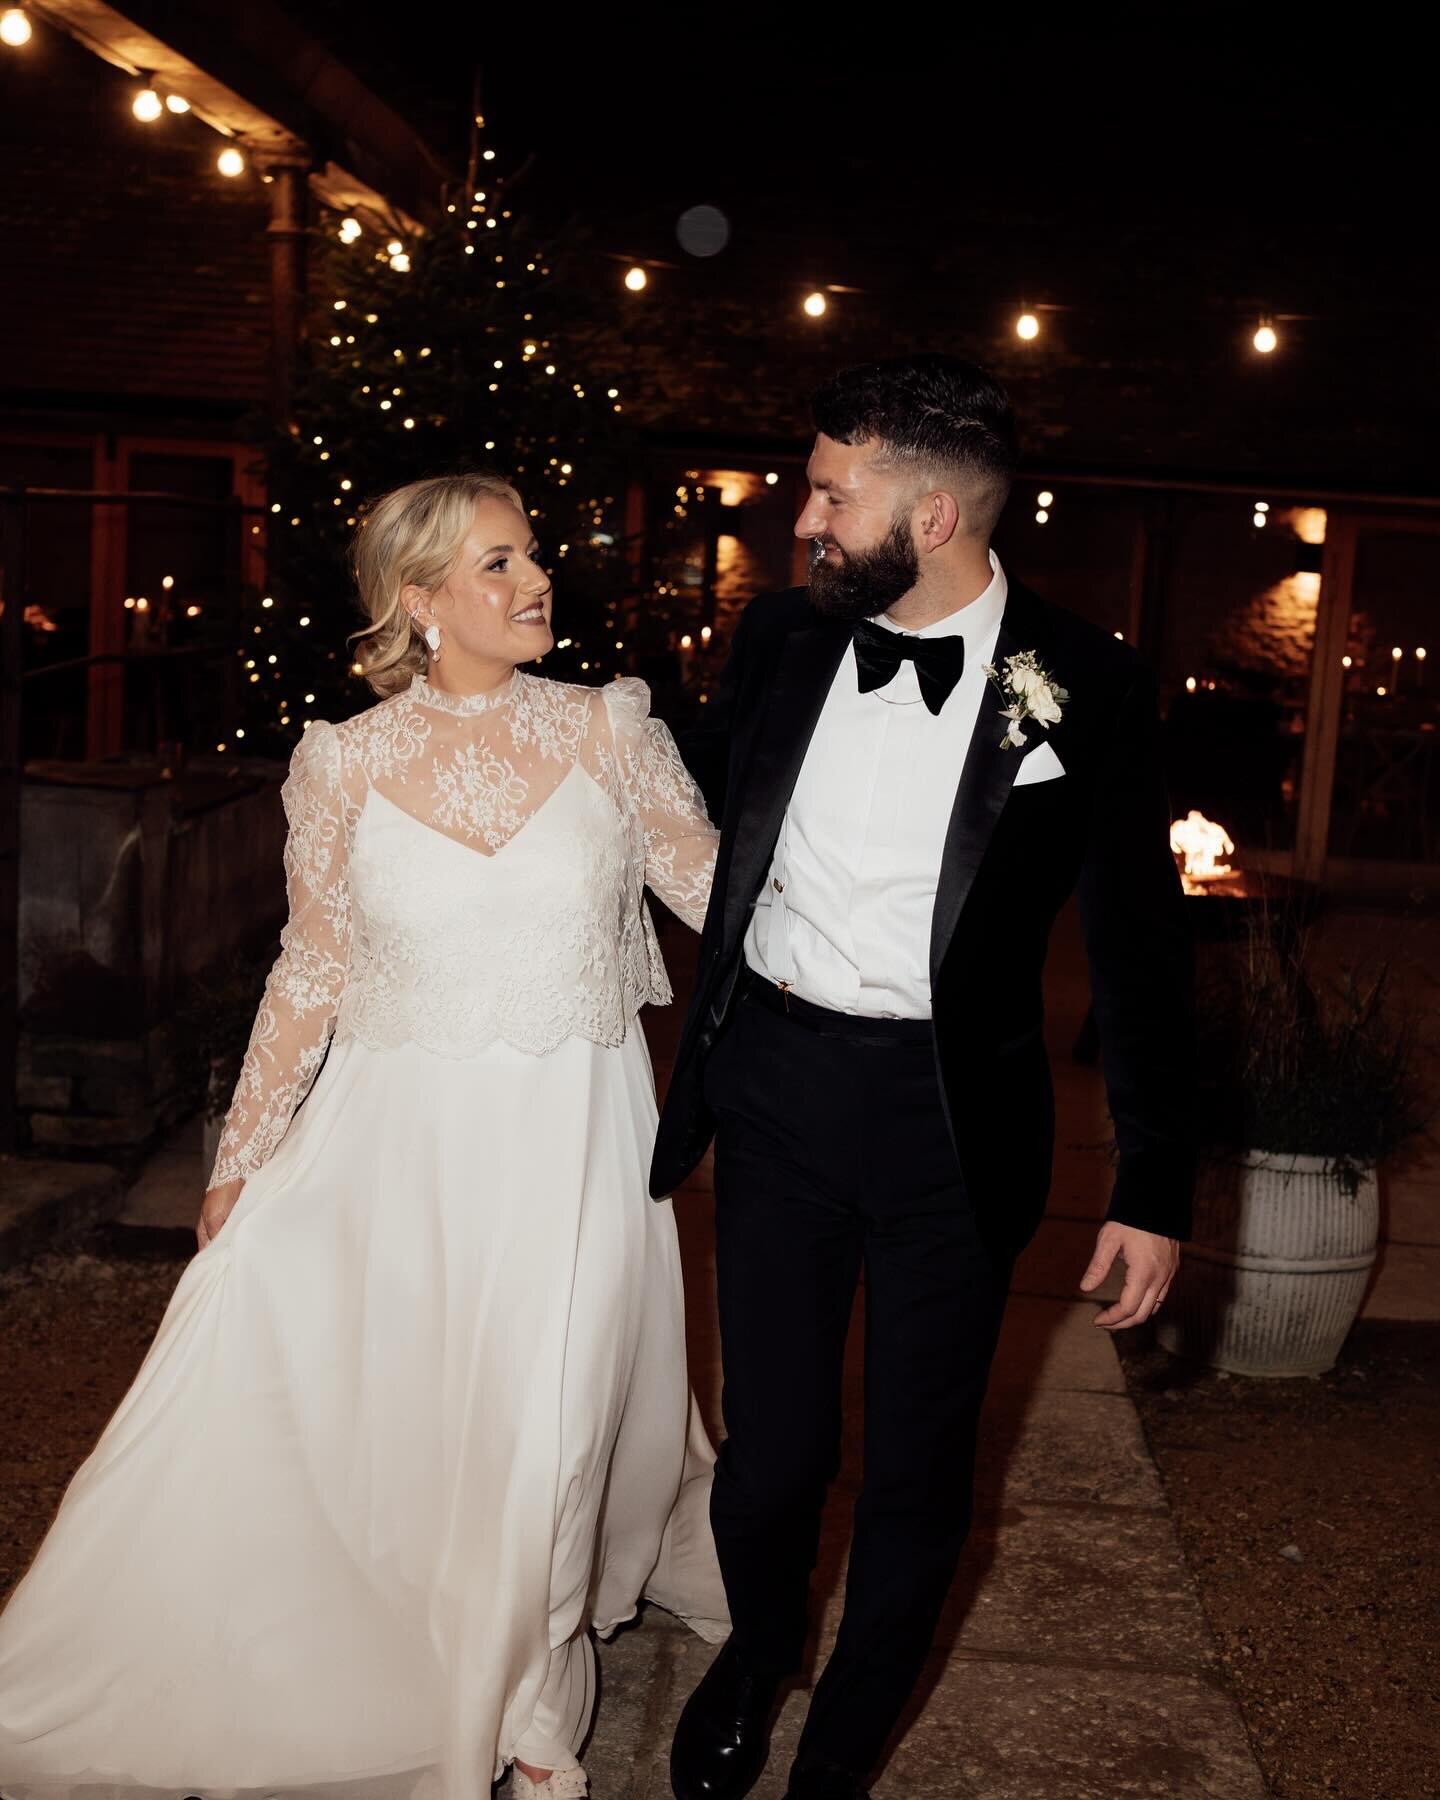 Merry Christmas from your team at Old Gore Barn 🥂🎄

H&amp;T&rsquo;s romantic, winter wedding was truly magical ✨

📸 @zachandgrace.co 

#wedding&nbsp;#engaged #Gloucester #Cotswolds #Cotswoldsweddingvenue #streetstyle #streetfood #venue&nbsp;#weddi